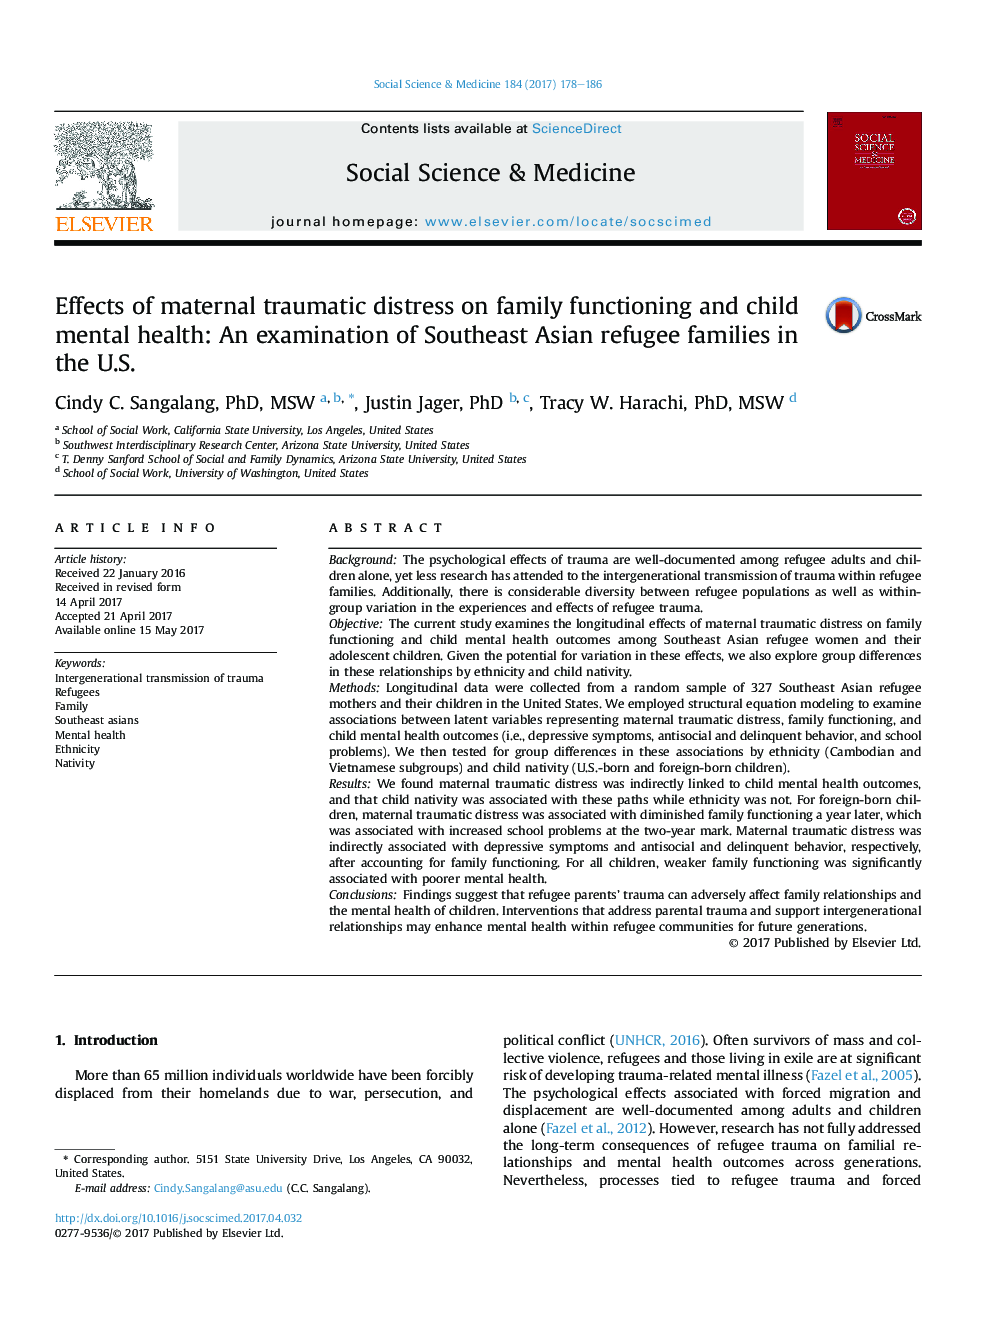 Effects of maternal traumatic distress on family functioning and child mental health: An examination of Southeast Asian refugee families in the U.S.